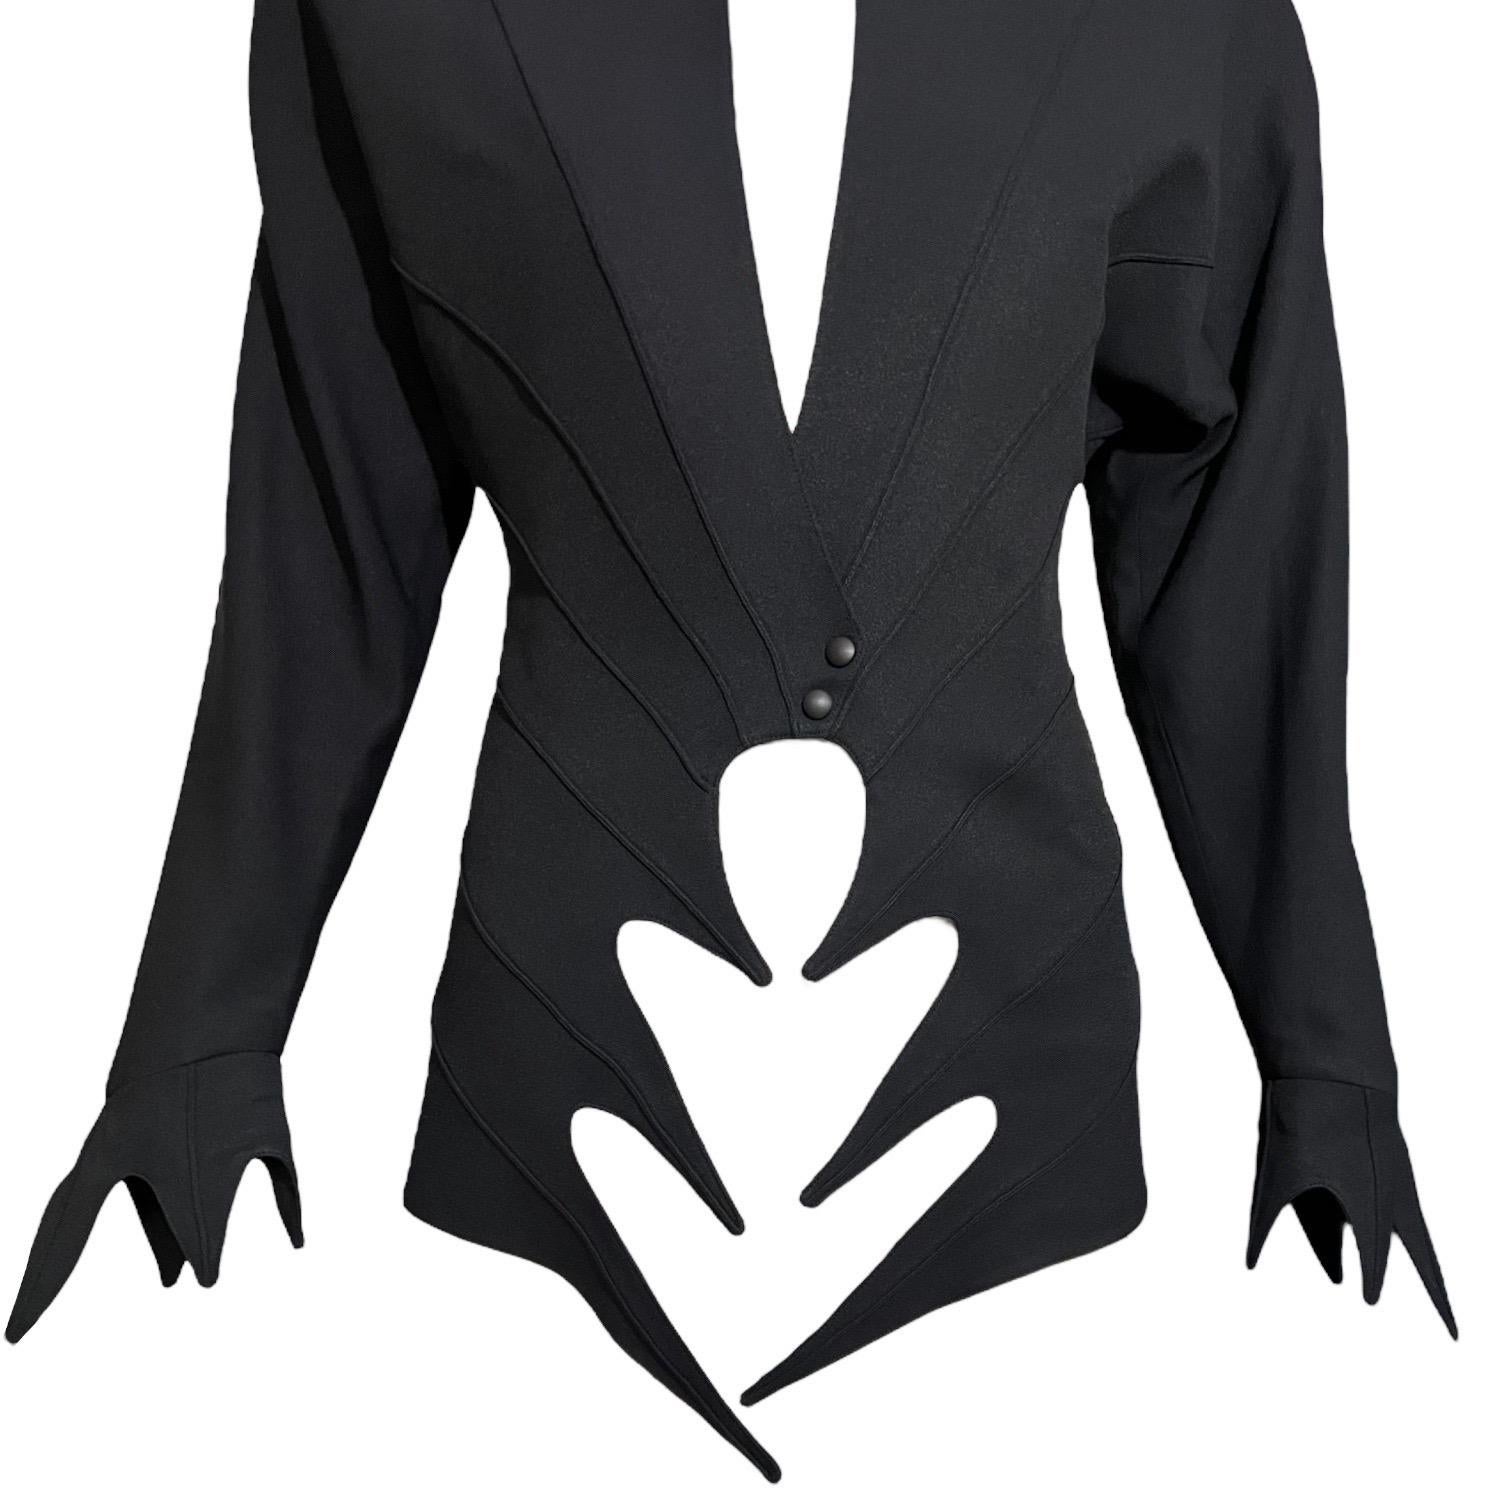 S/S 1989 Thierry Mugler Runway Sculptural Black Pointed Cutout Jacket  For Sale 3